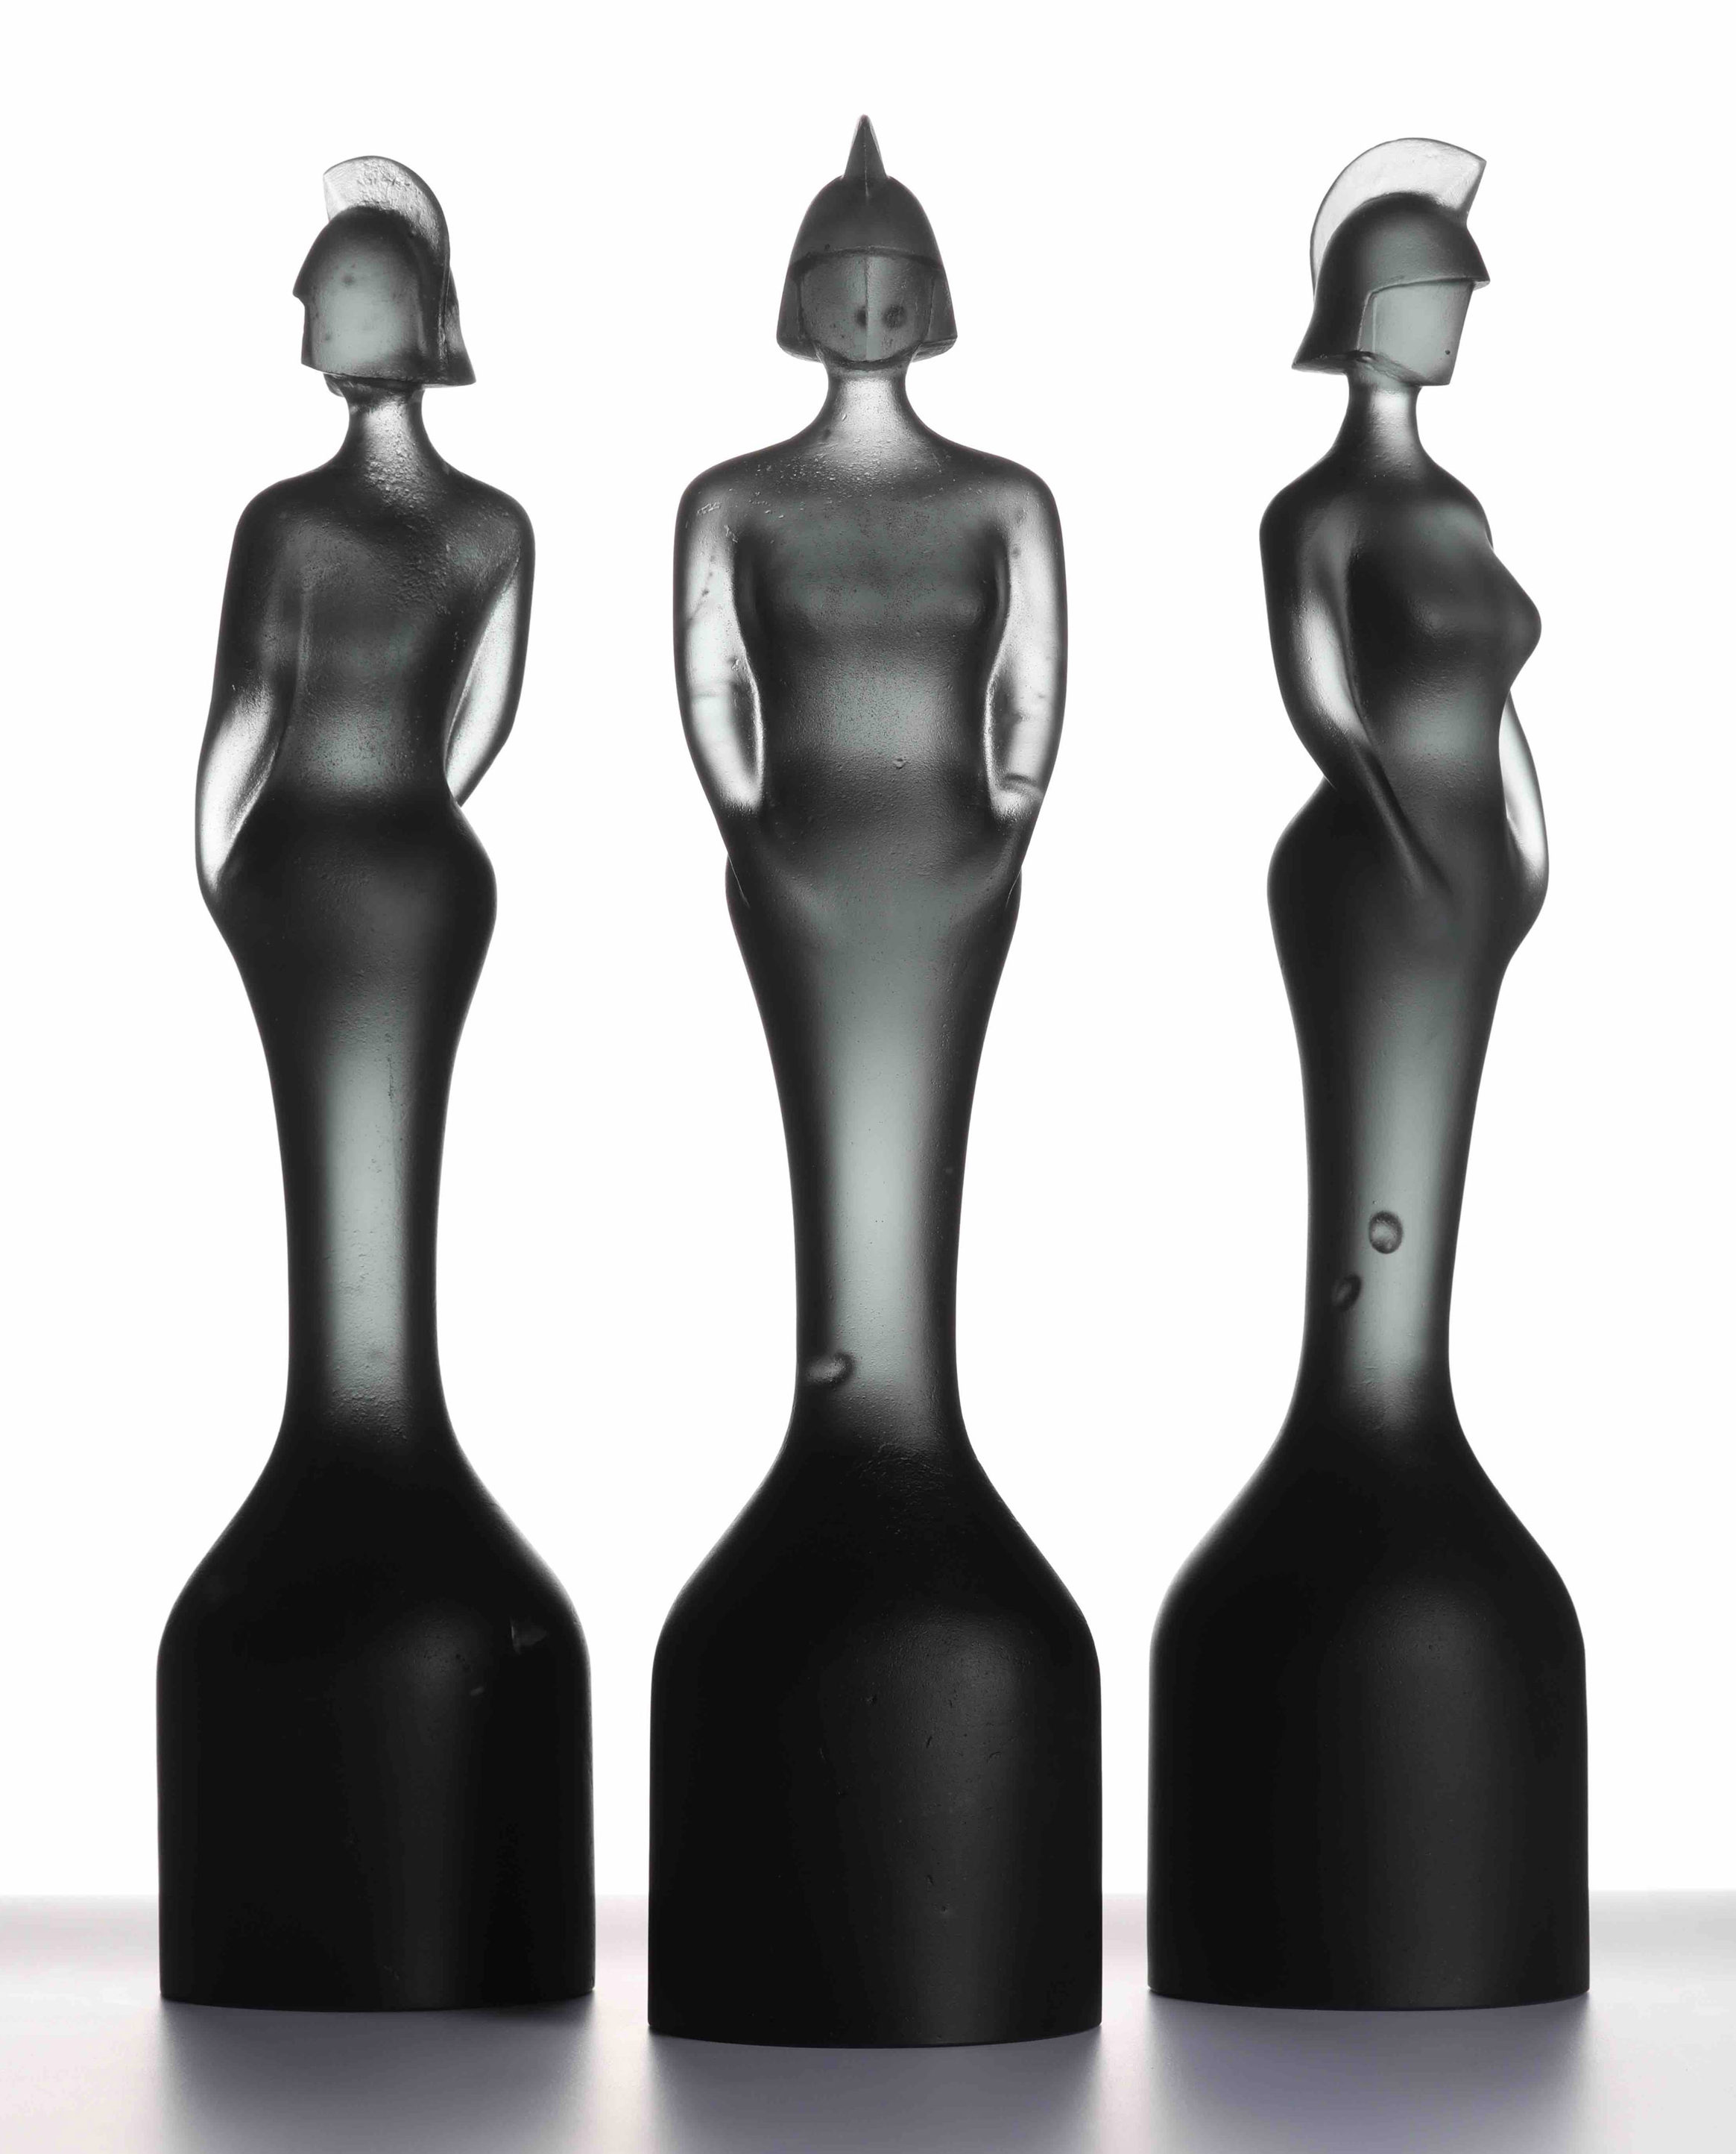 David Adjaye designs Brit Awards 2019 trophy to celebrate "perfection and imperfection"